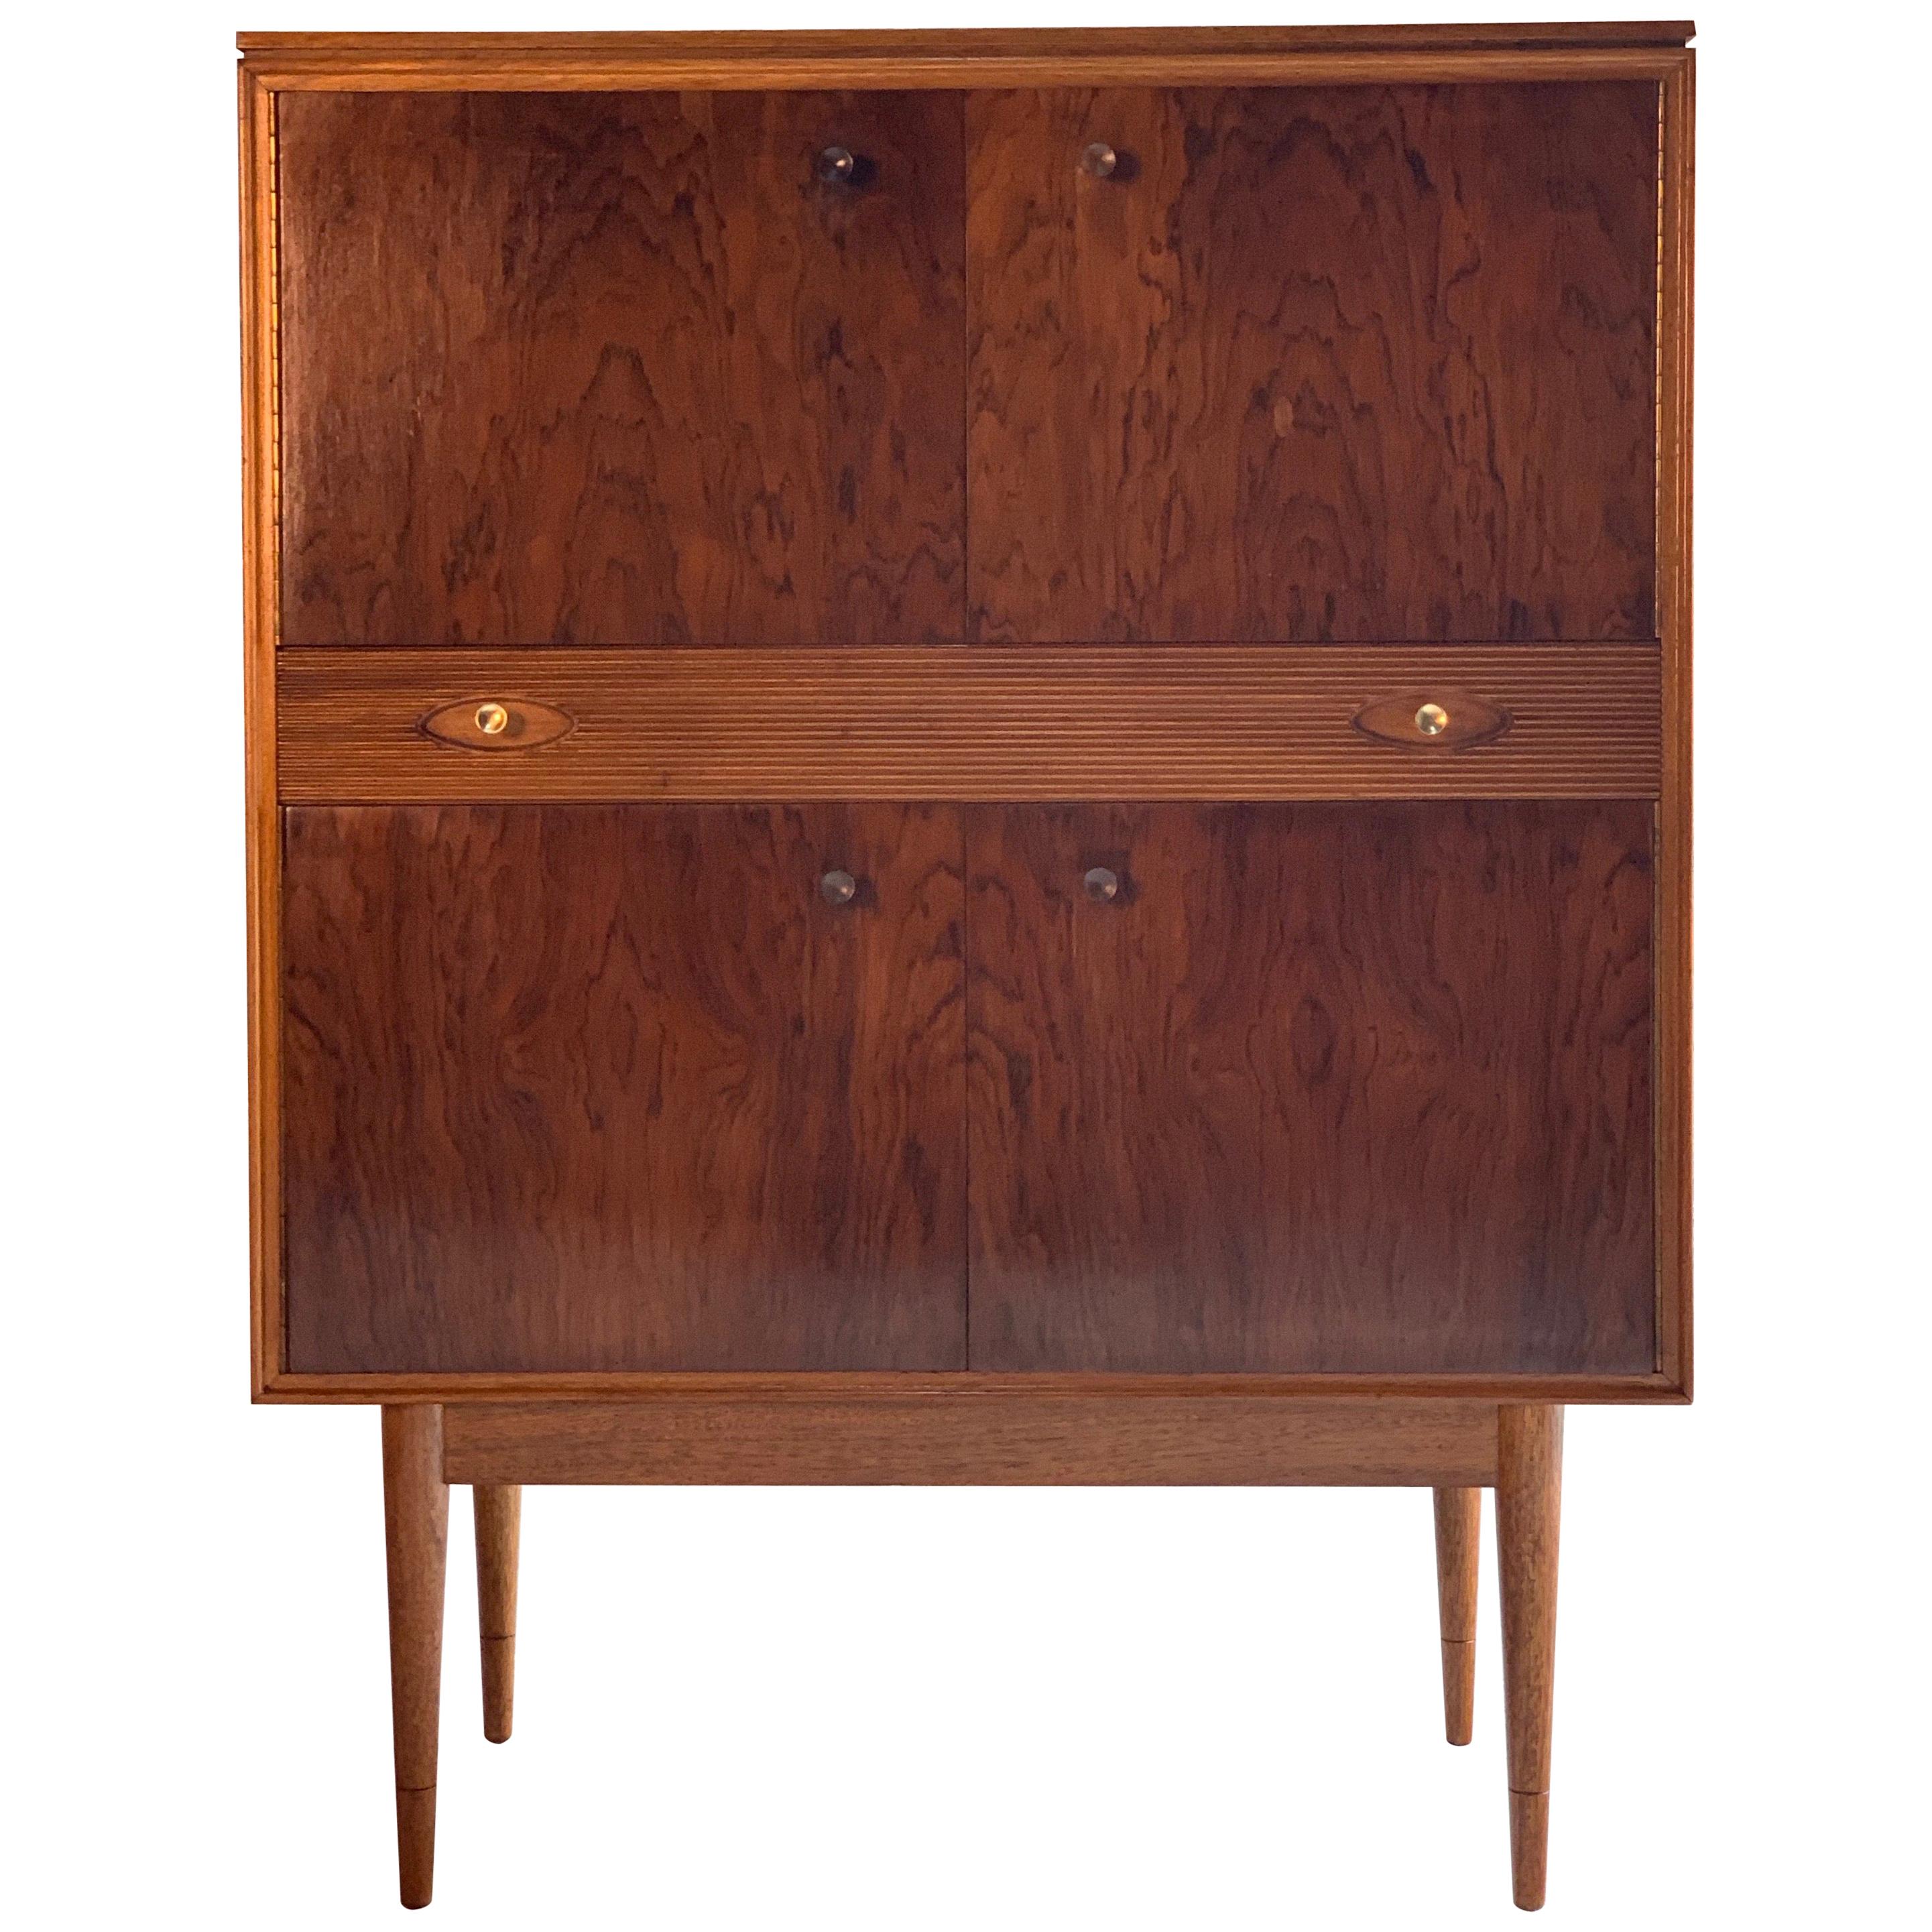 Robert Heritage for Archie Shine Rosewood Cocktail Cabinet Hamilton Range 'No 2'